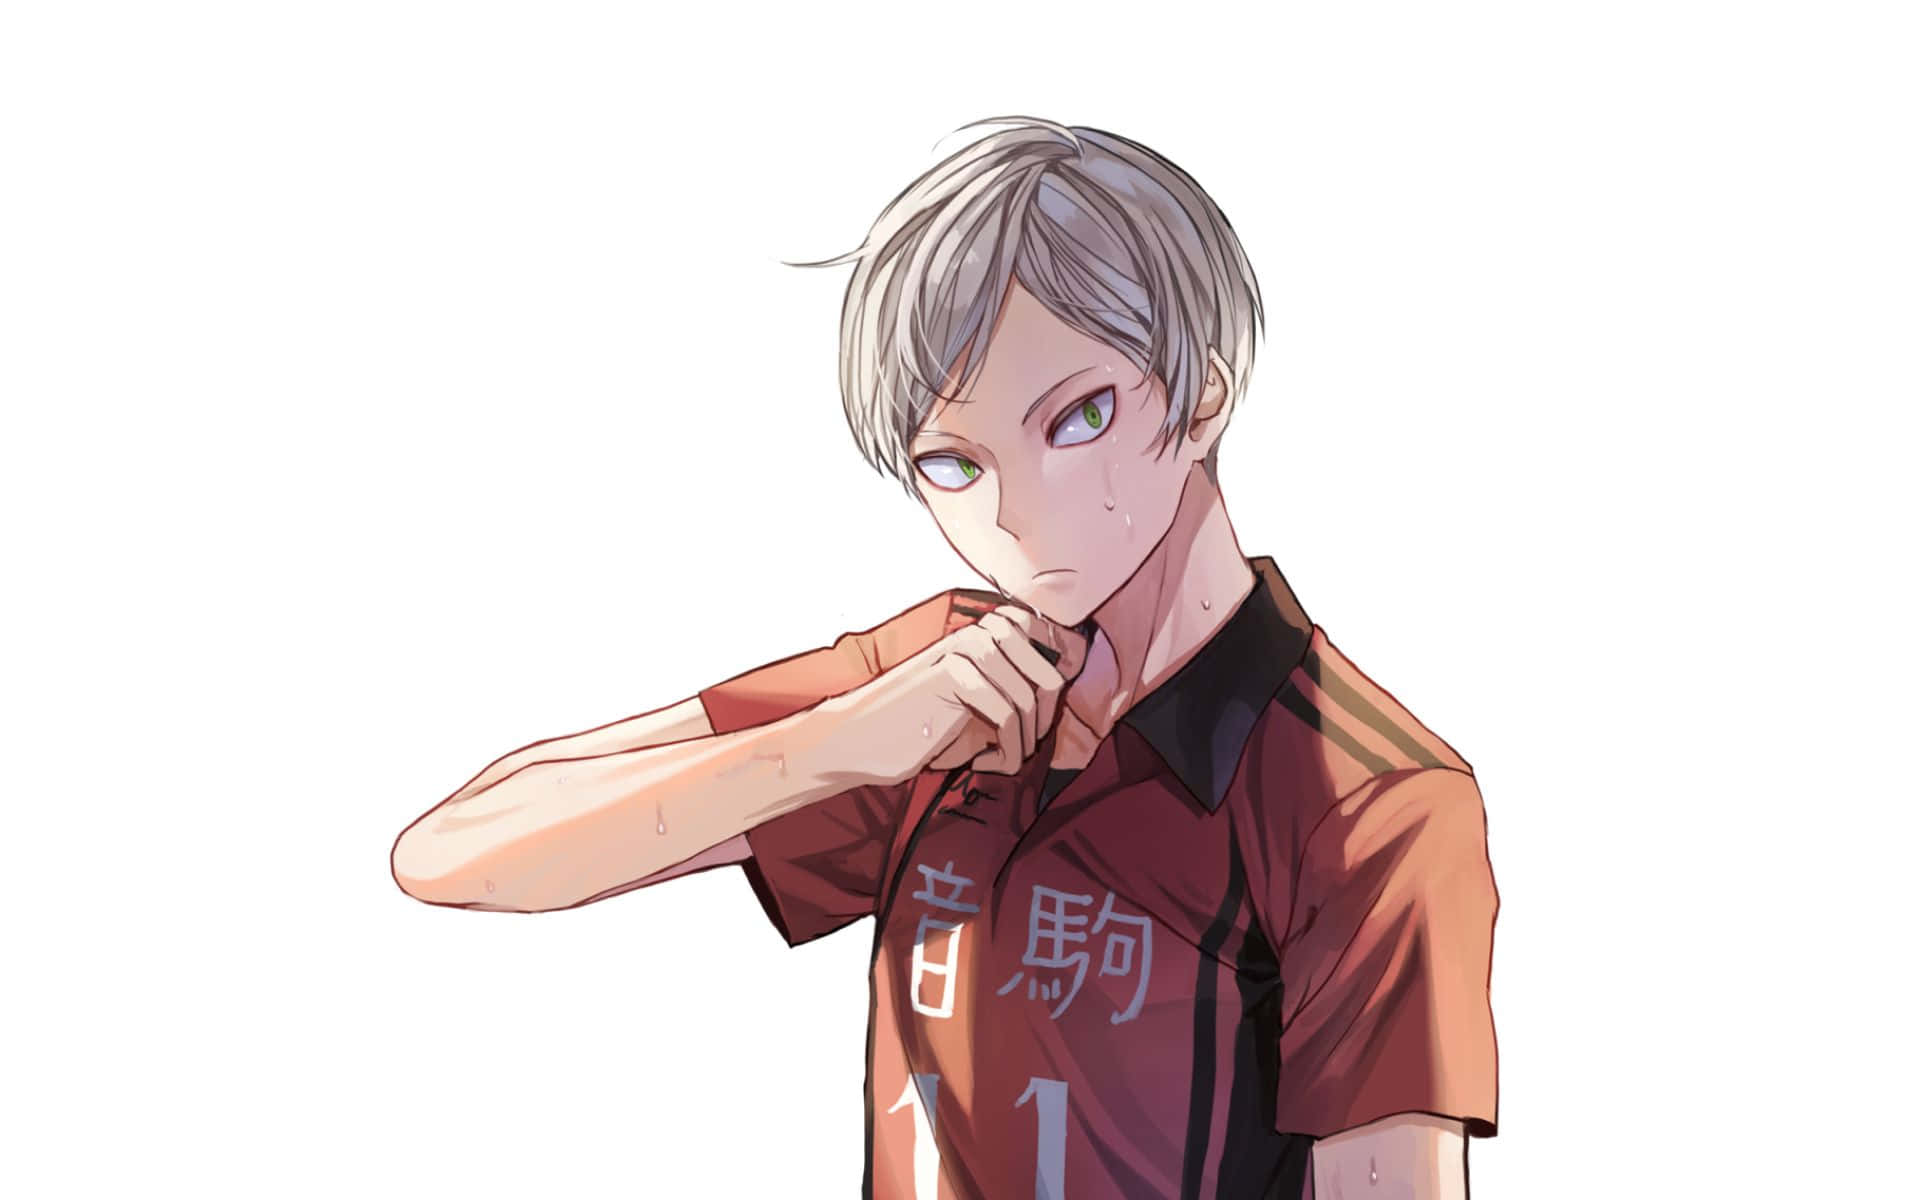 Lev Haiba soaring high on the volleyball court Wallpaper